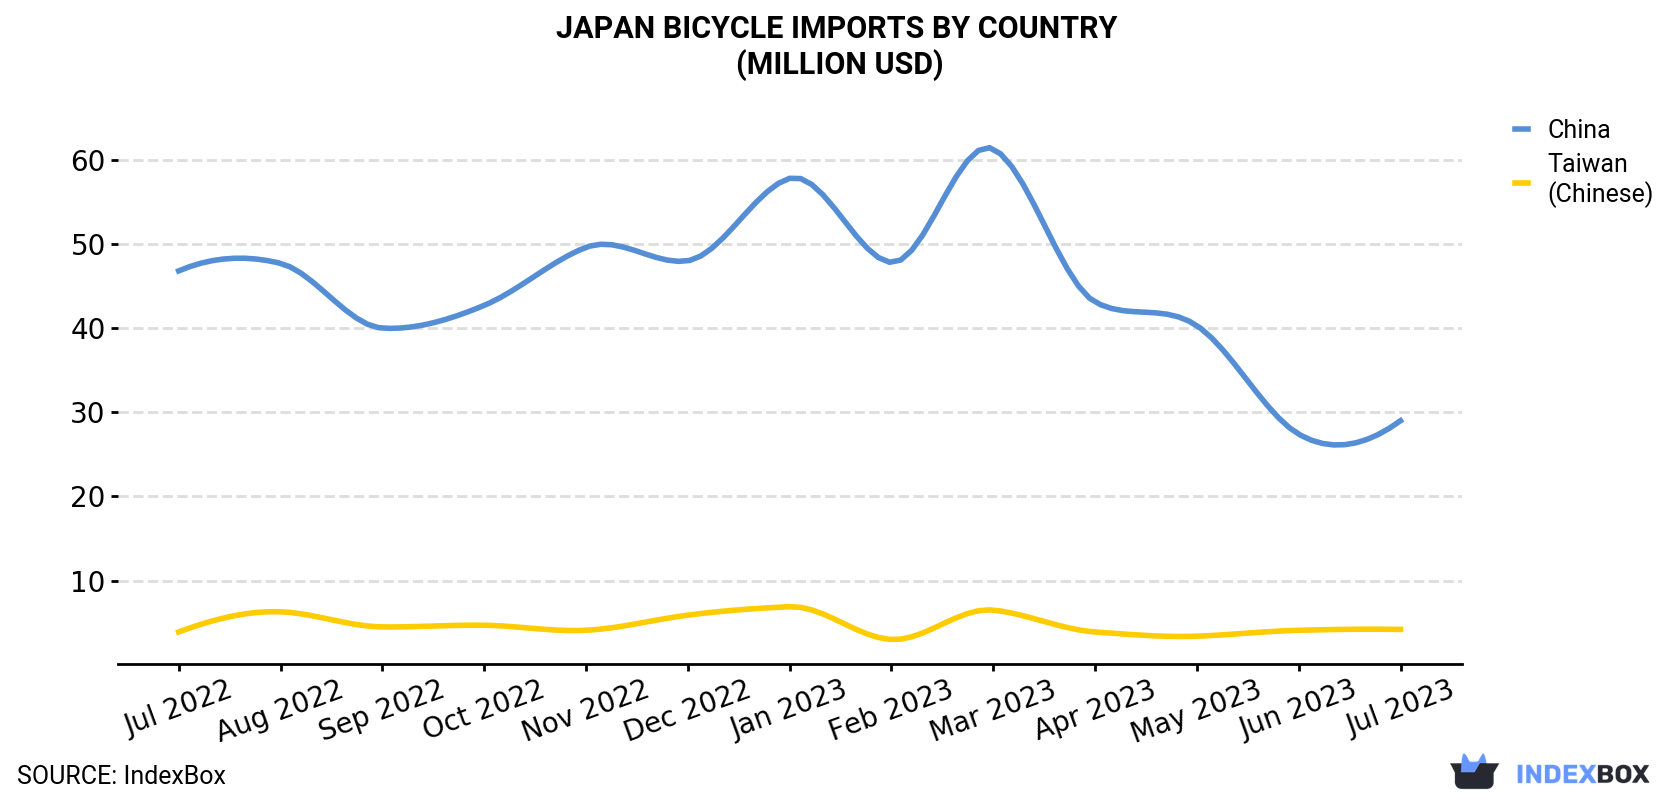 Japan Bicycle Imports By Country (Million USD)